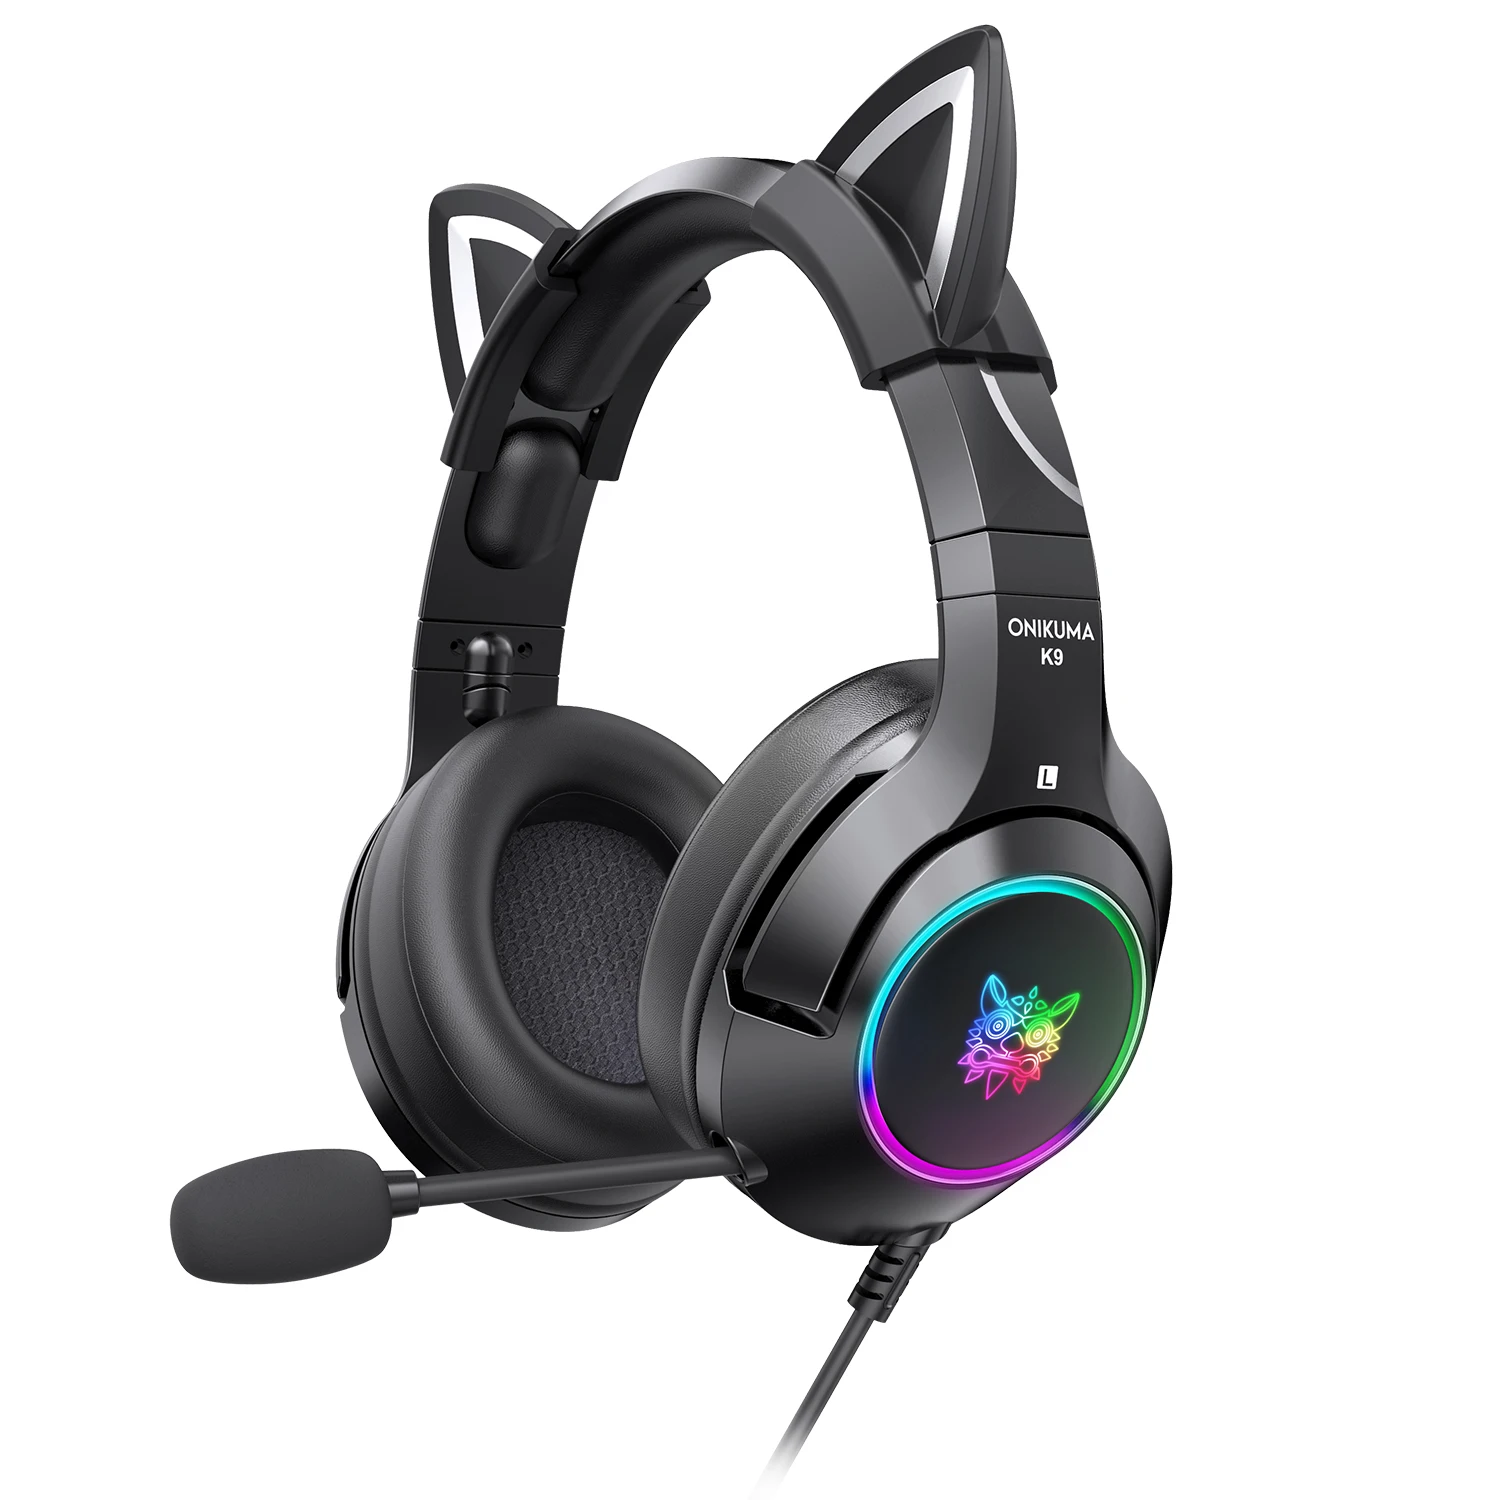 

ONIKUMA K9 Black Gaming Headset For Girls PC Stereo Gaming Headphones with Mic & LED Light For Laptop PS4 Xbox One Controller